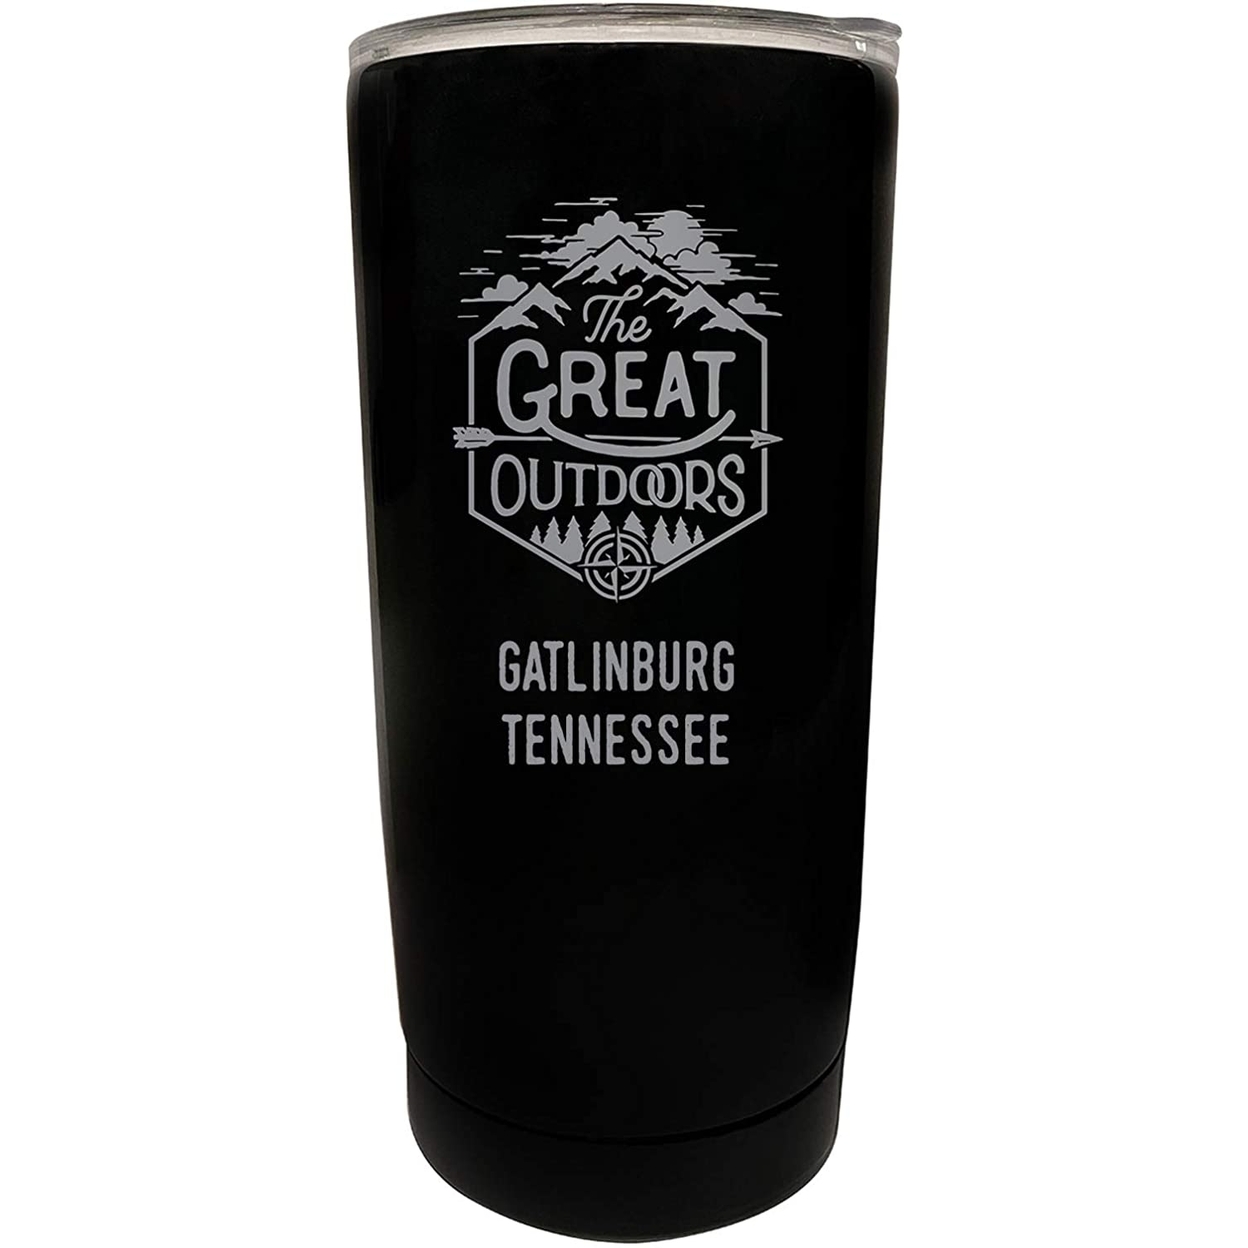 Gatlinburg Tennessee Etched 16 Oz Stainless Steel Insulated Tumbler Outdoor Adventure Design - Black